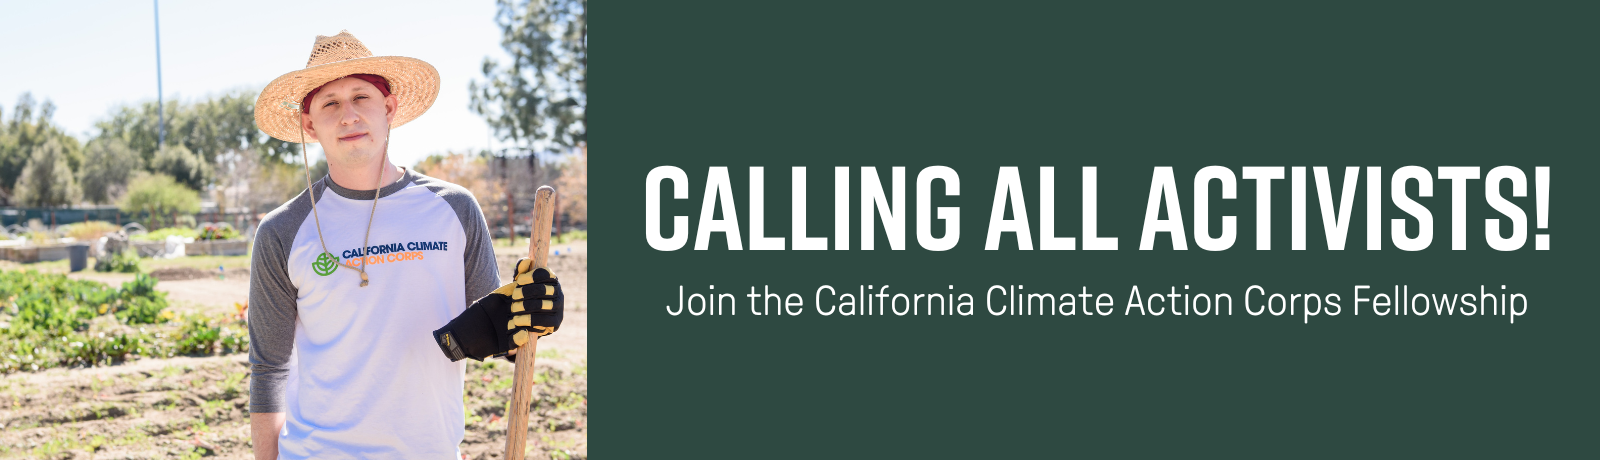 Calling all activists! Join the California Climate Action Corps Fellowship